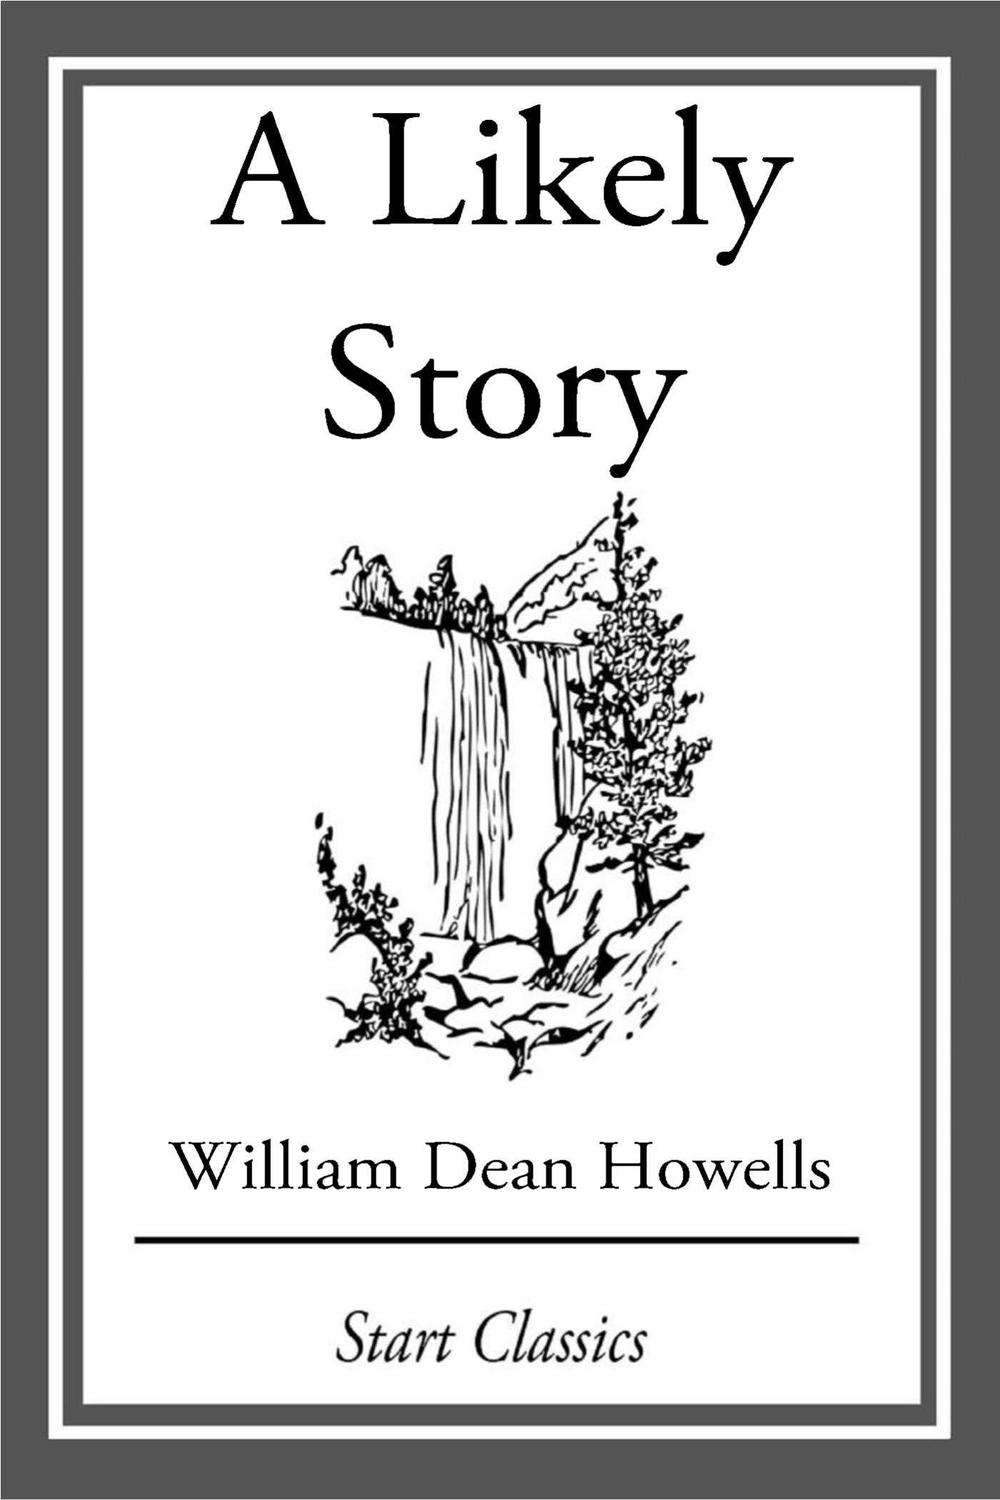 A Likely Story - William Dean Howells